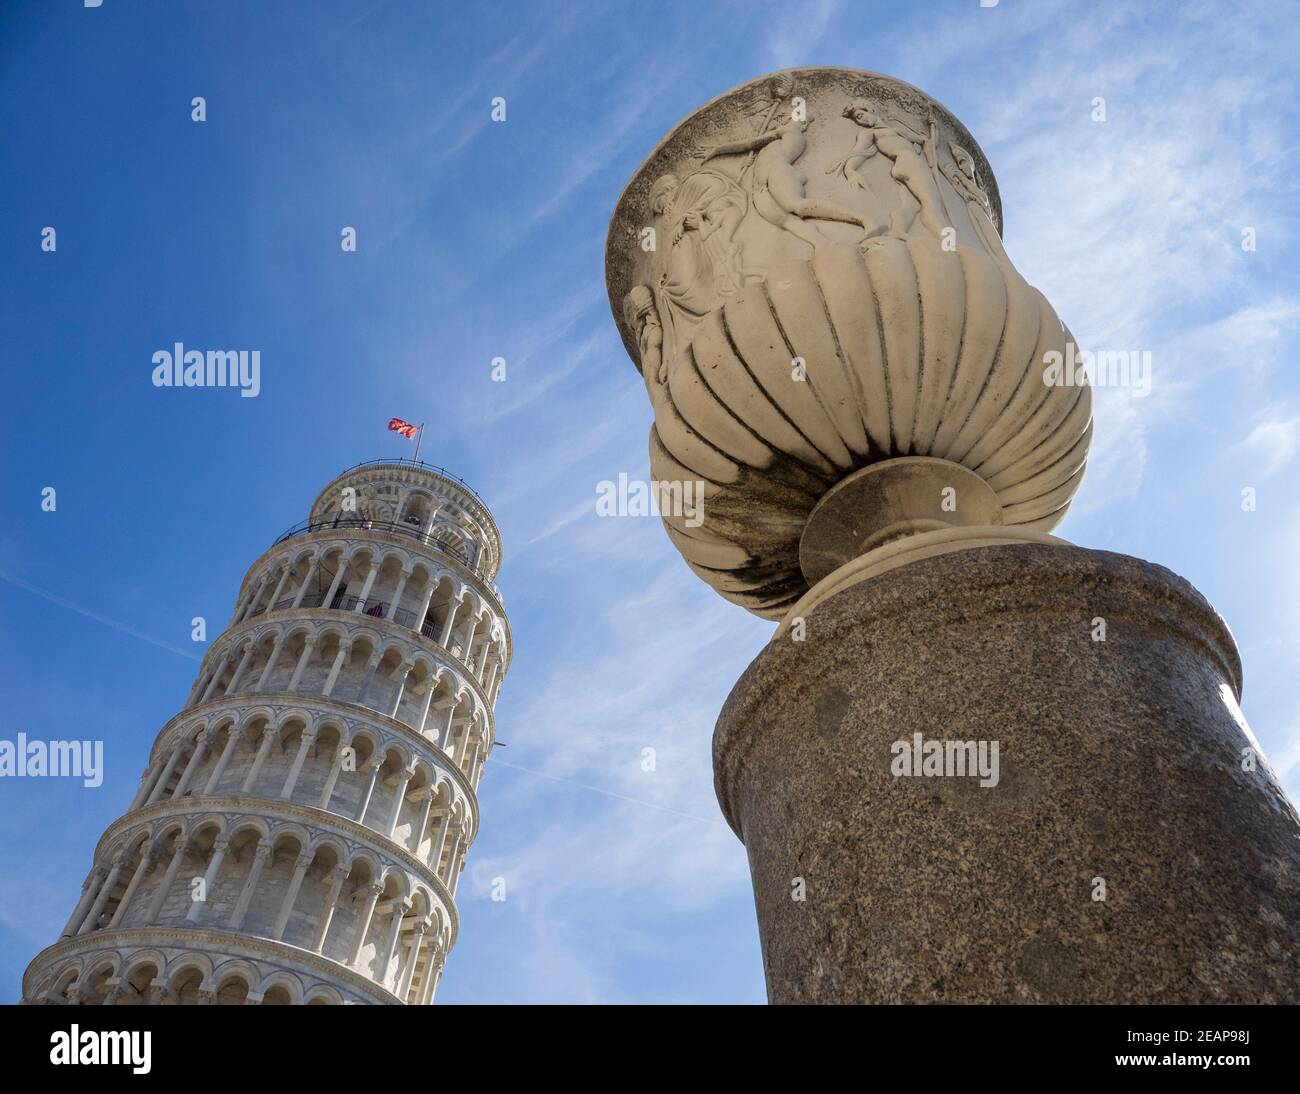 Leaning Tower of Pisa with Big Vase in the Foreground Stock Photo